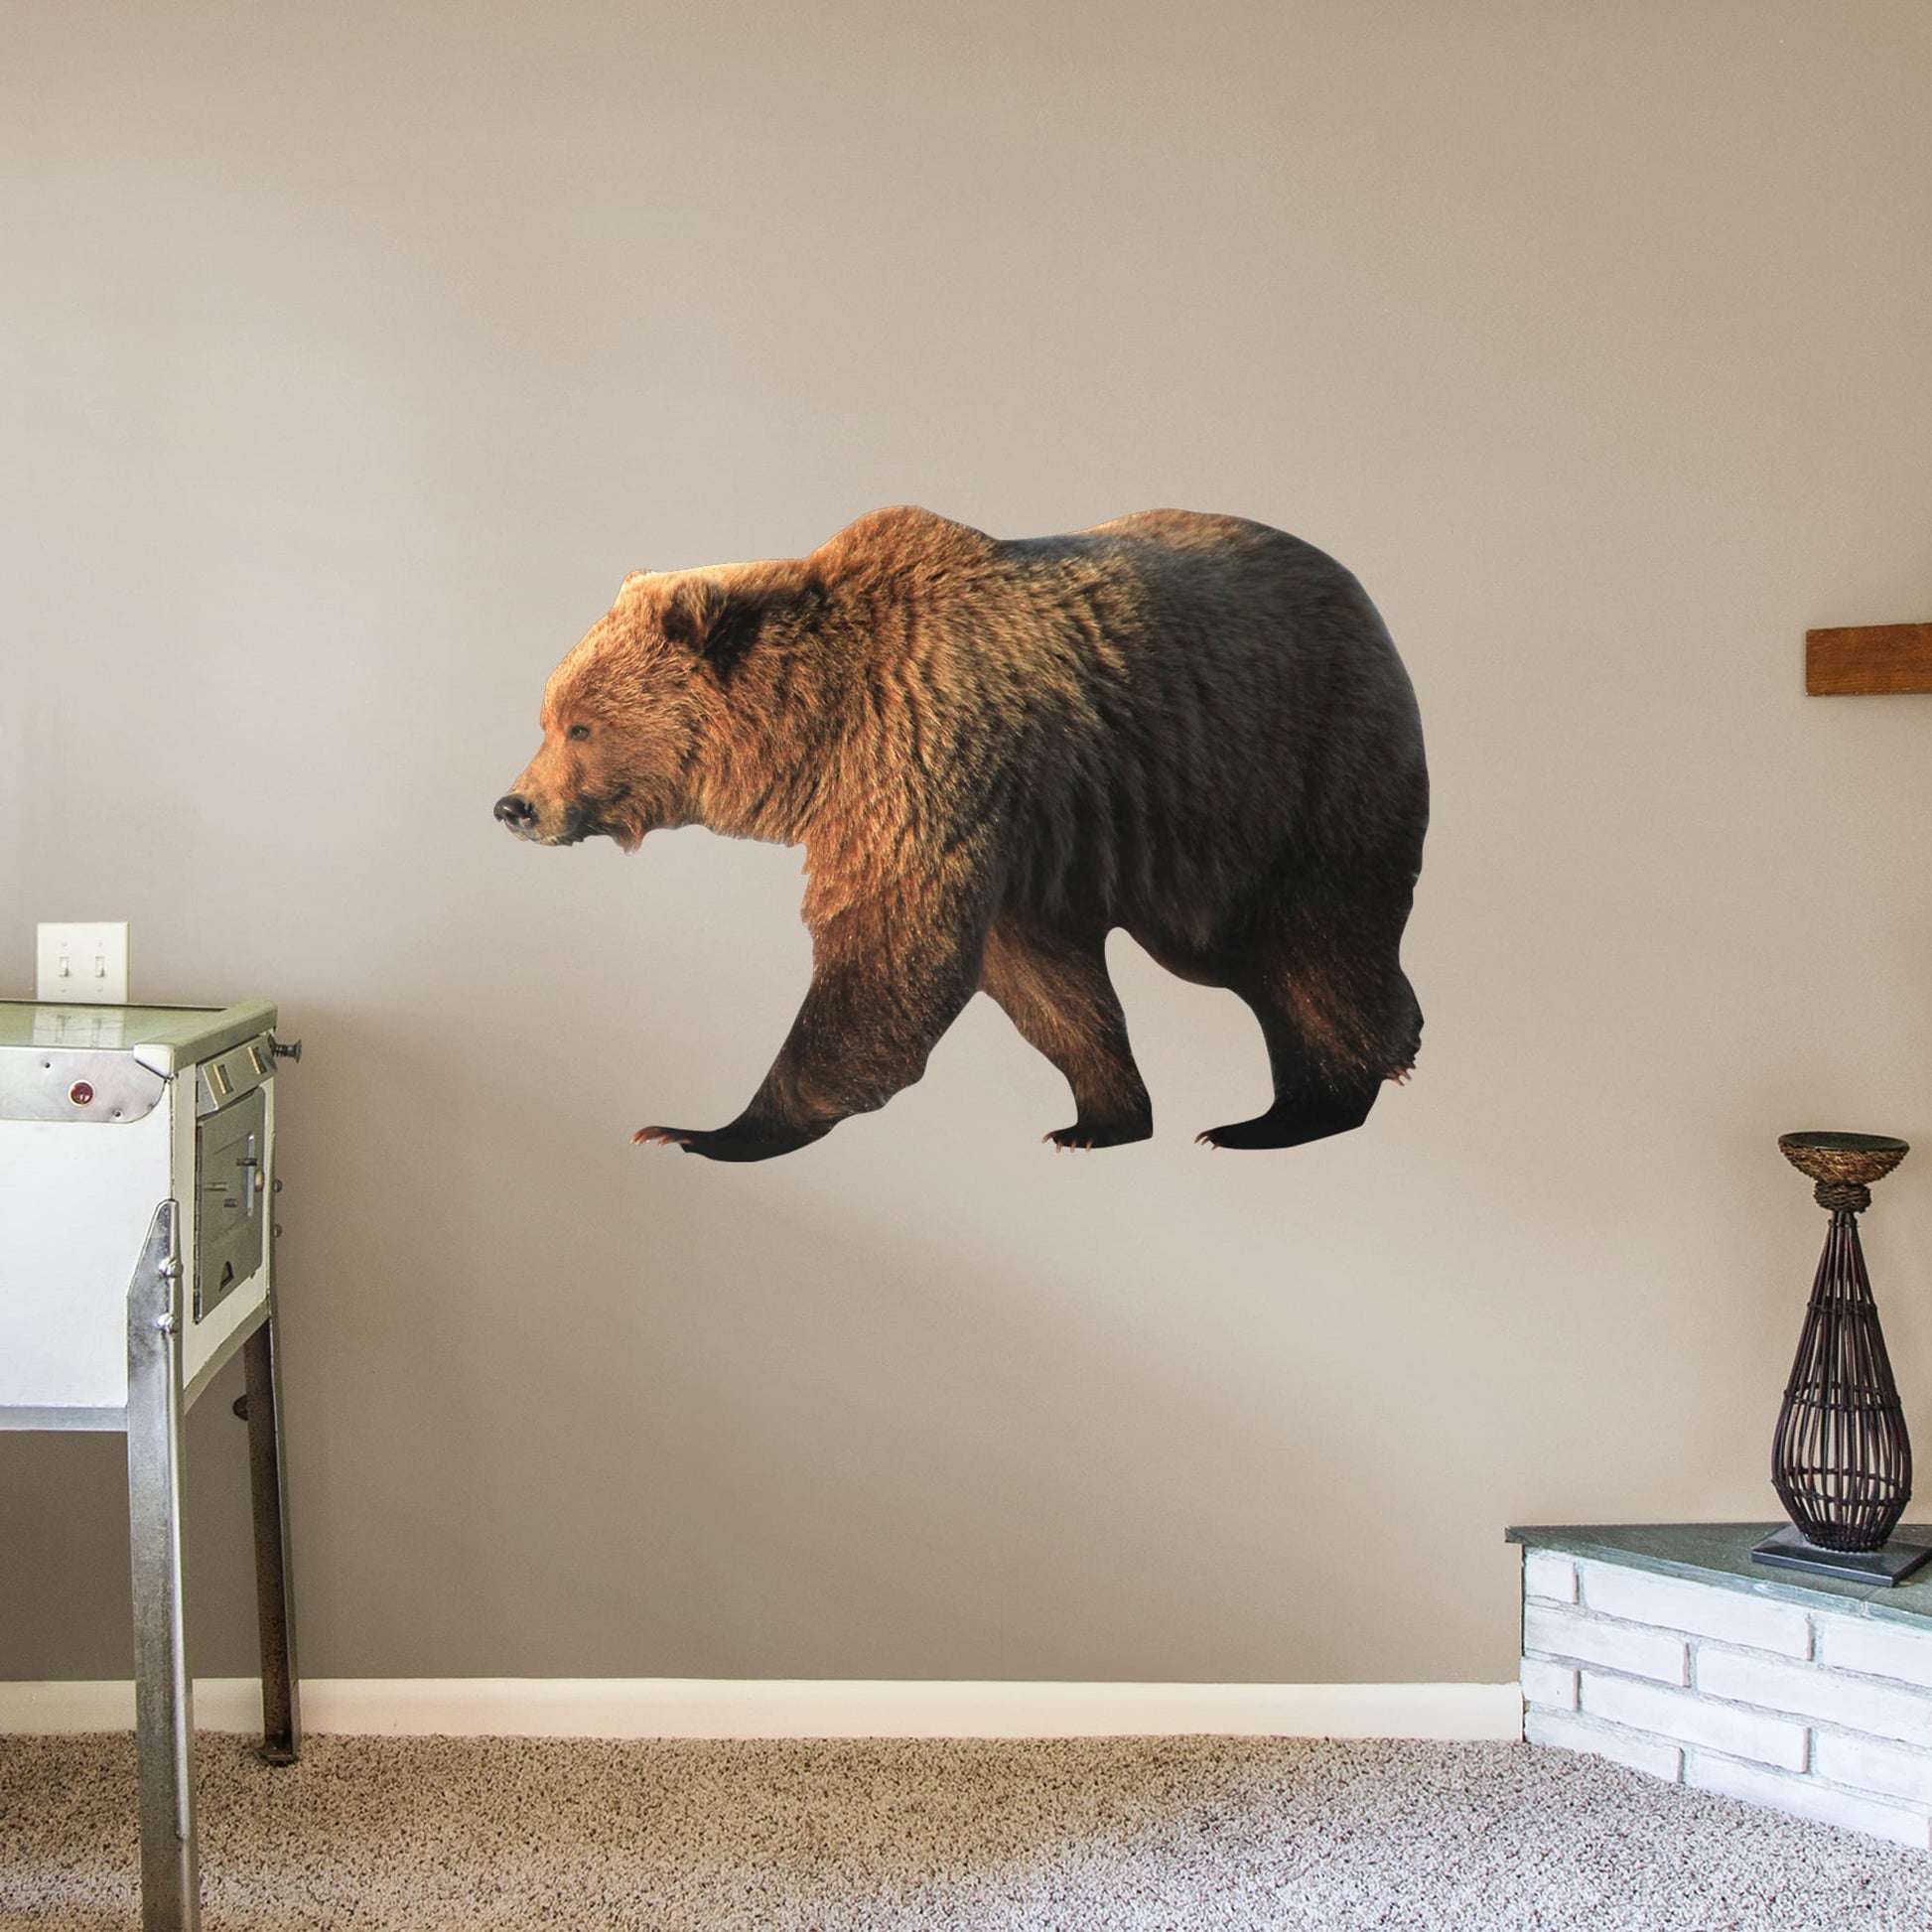 Life-Size Animal + 2 Decals (73"W x 51"H)